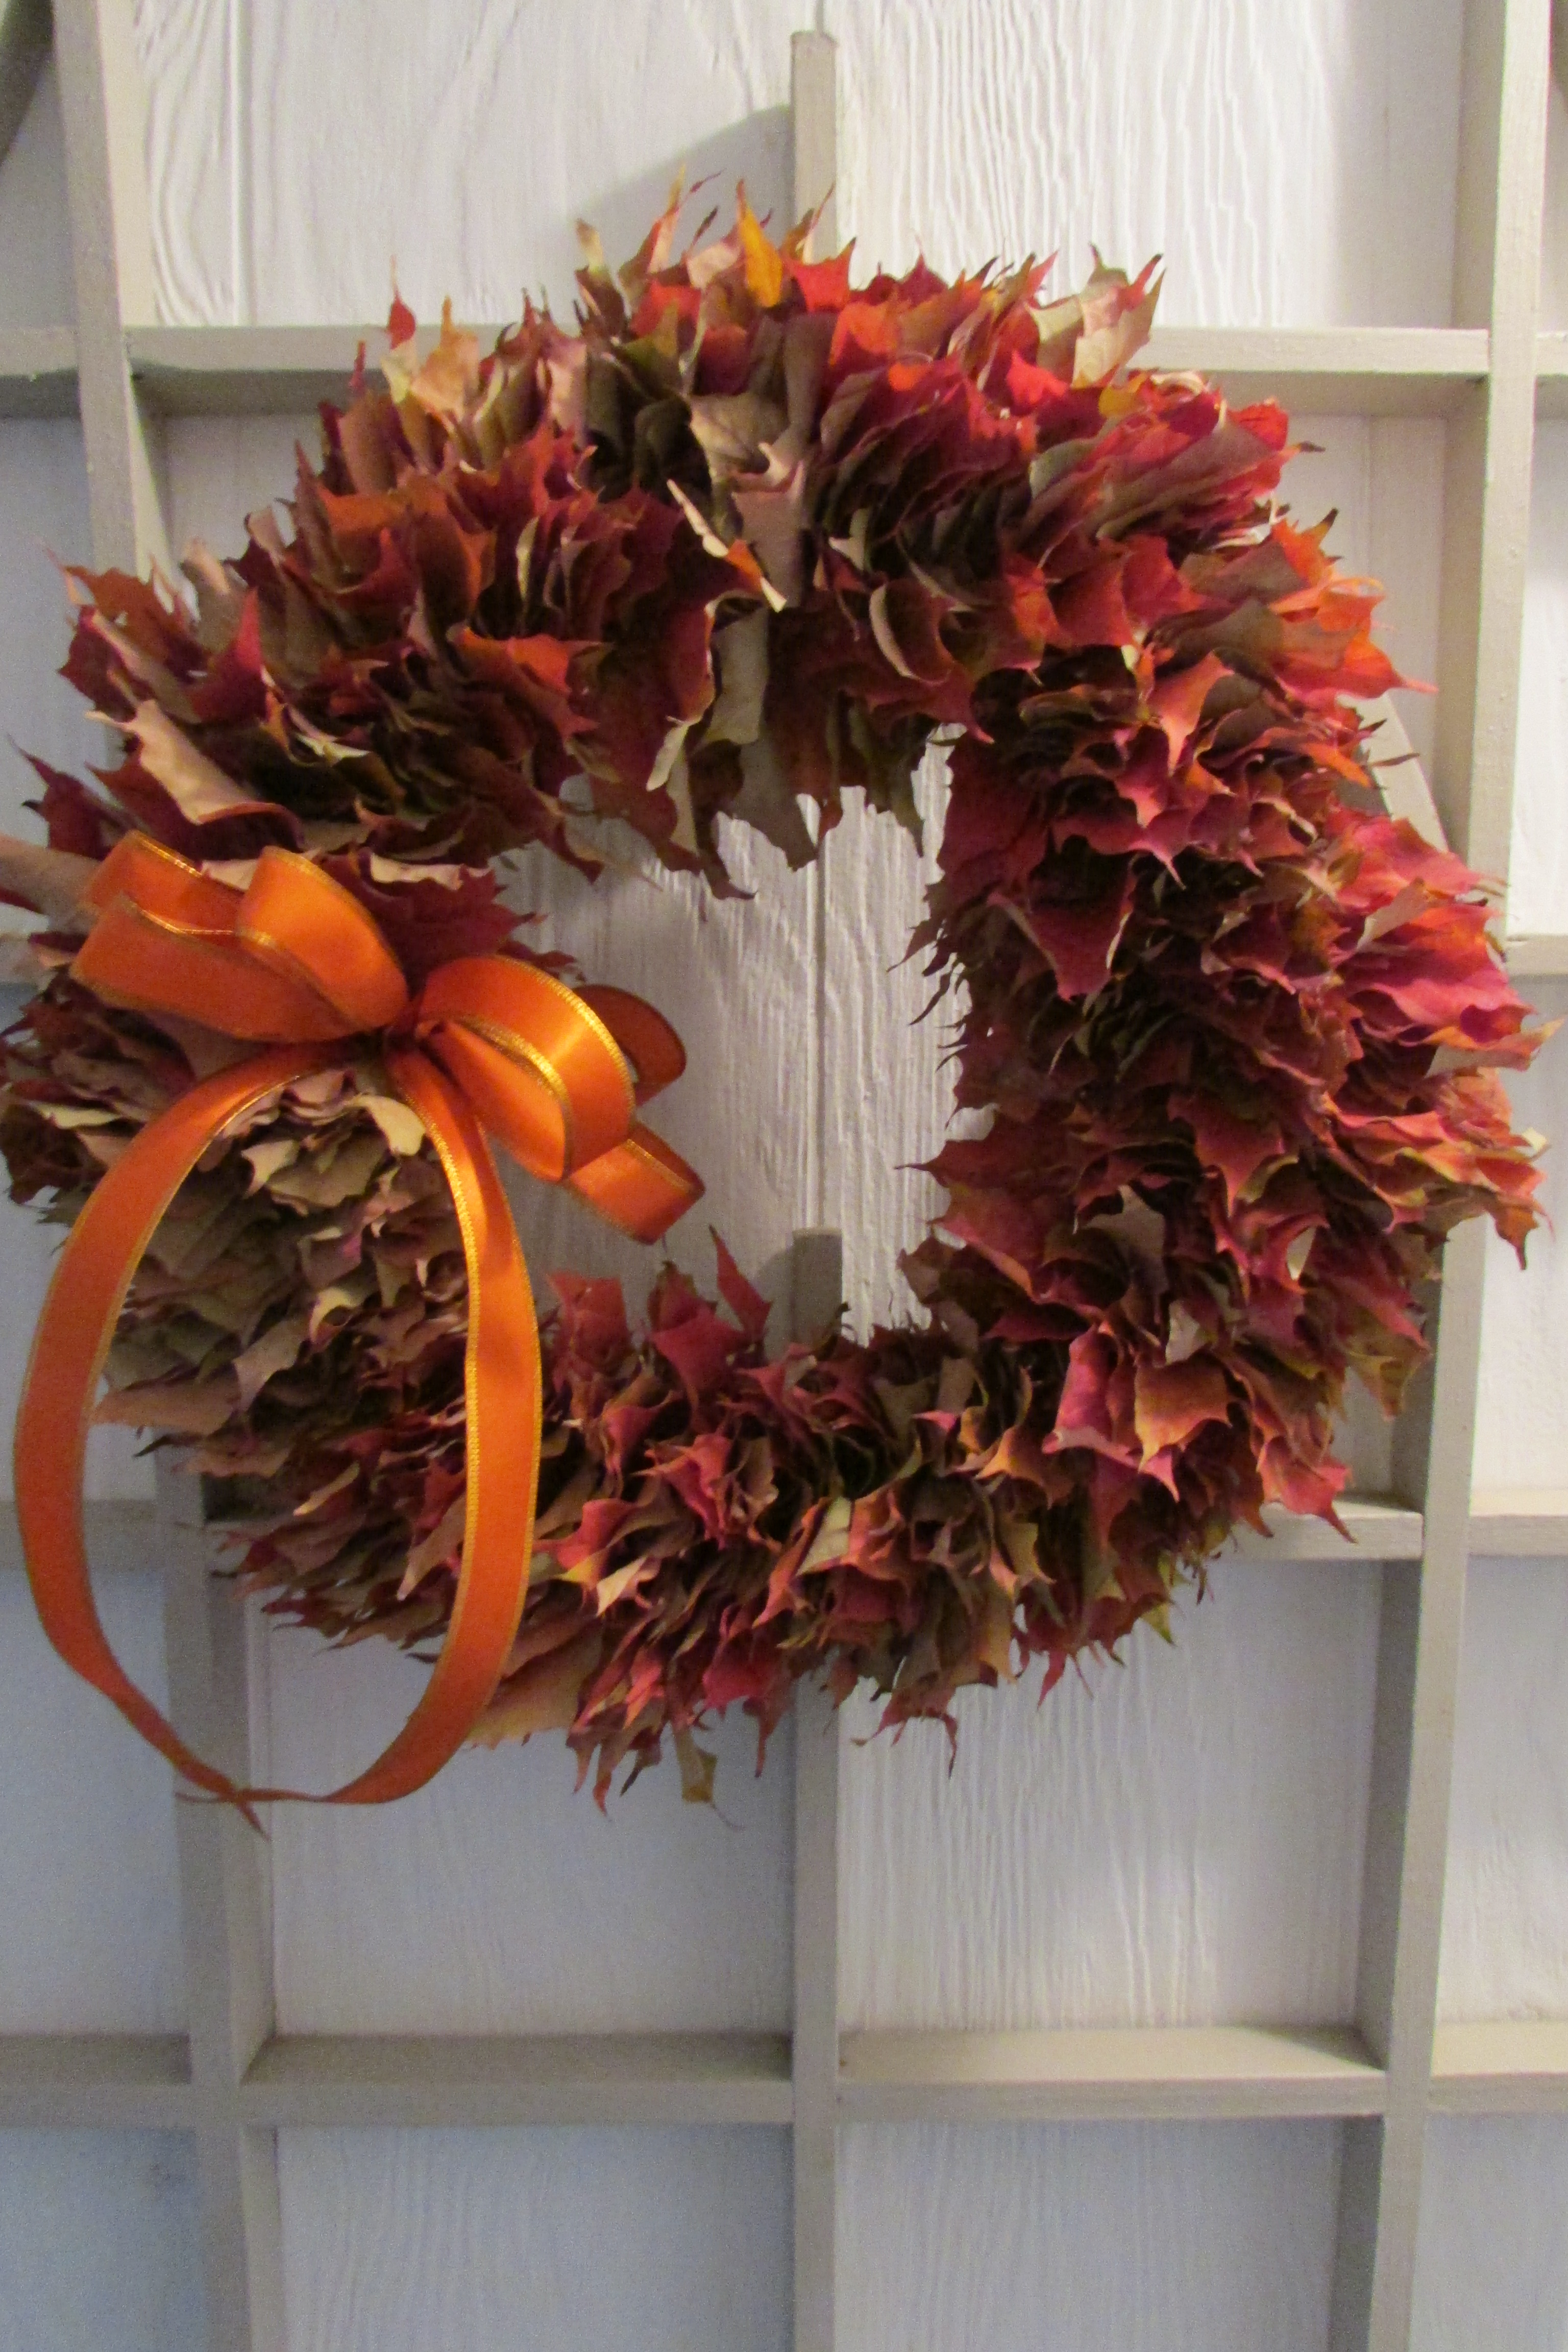 How to make a Leaf Wreath of Fallen Leaves | Fred Gonsowski Garden Home